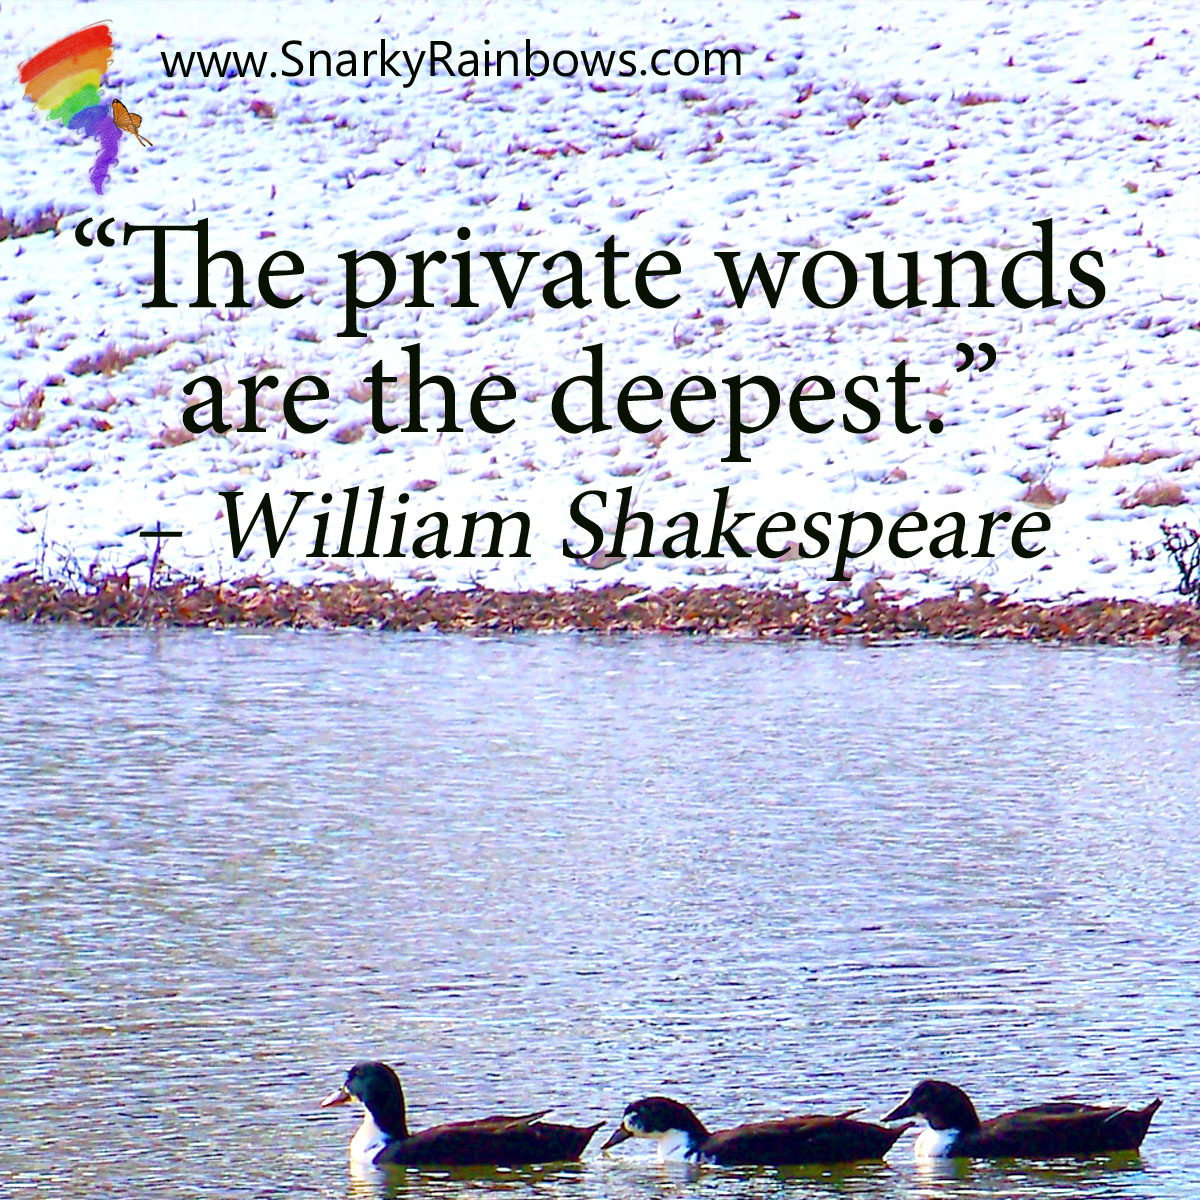 Quote of the Day - William Shakespeare